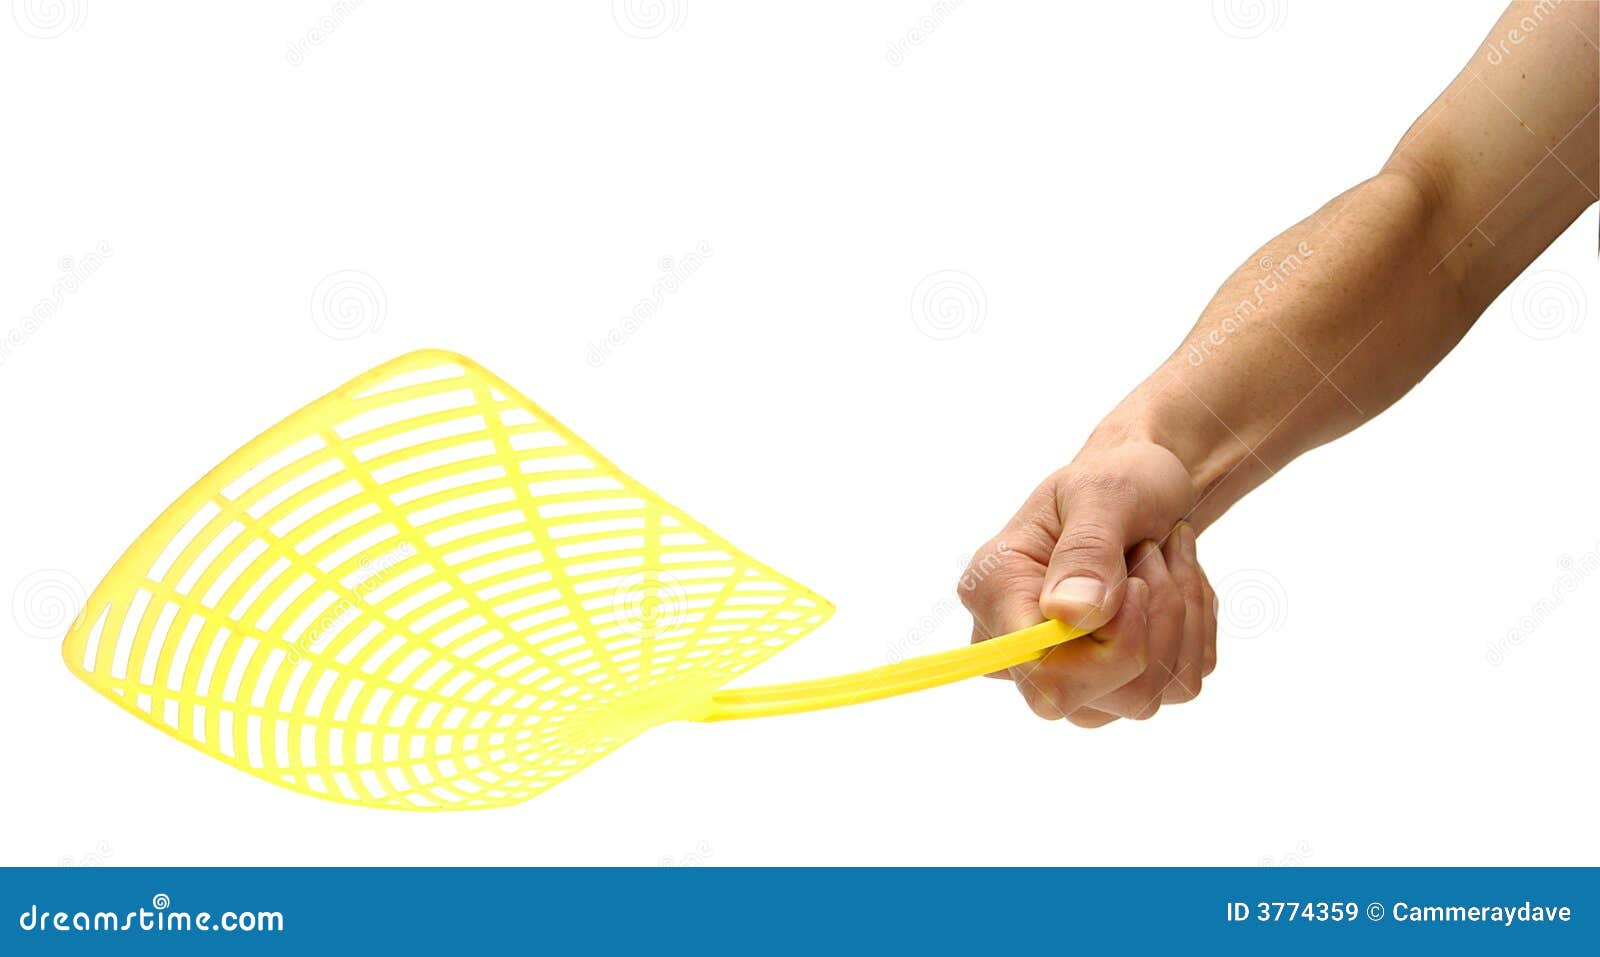 fly swatter clipart - photo #41